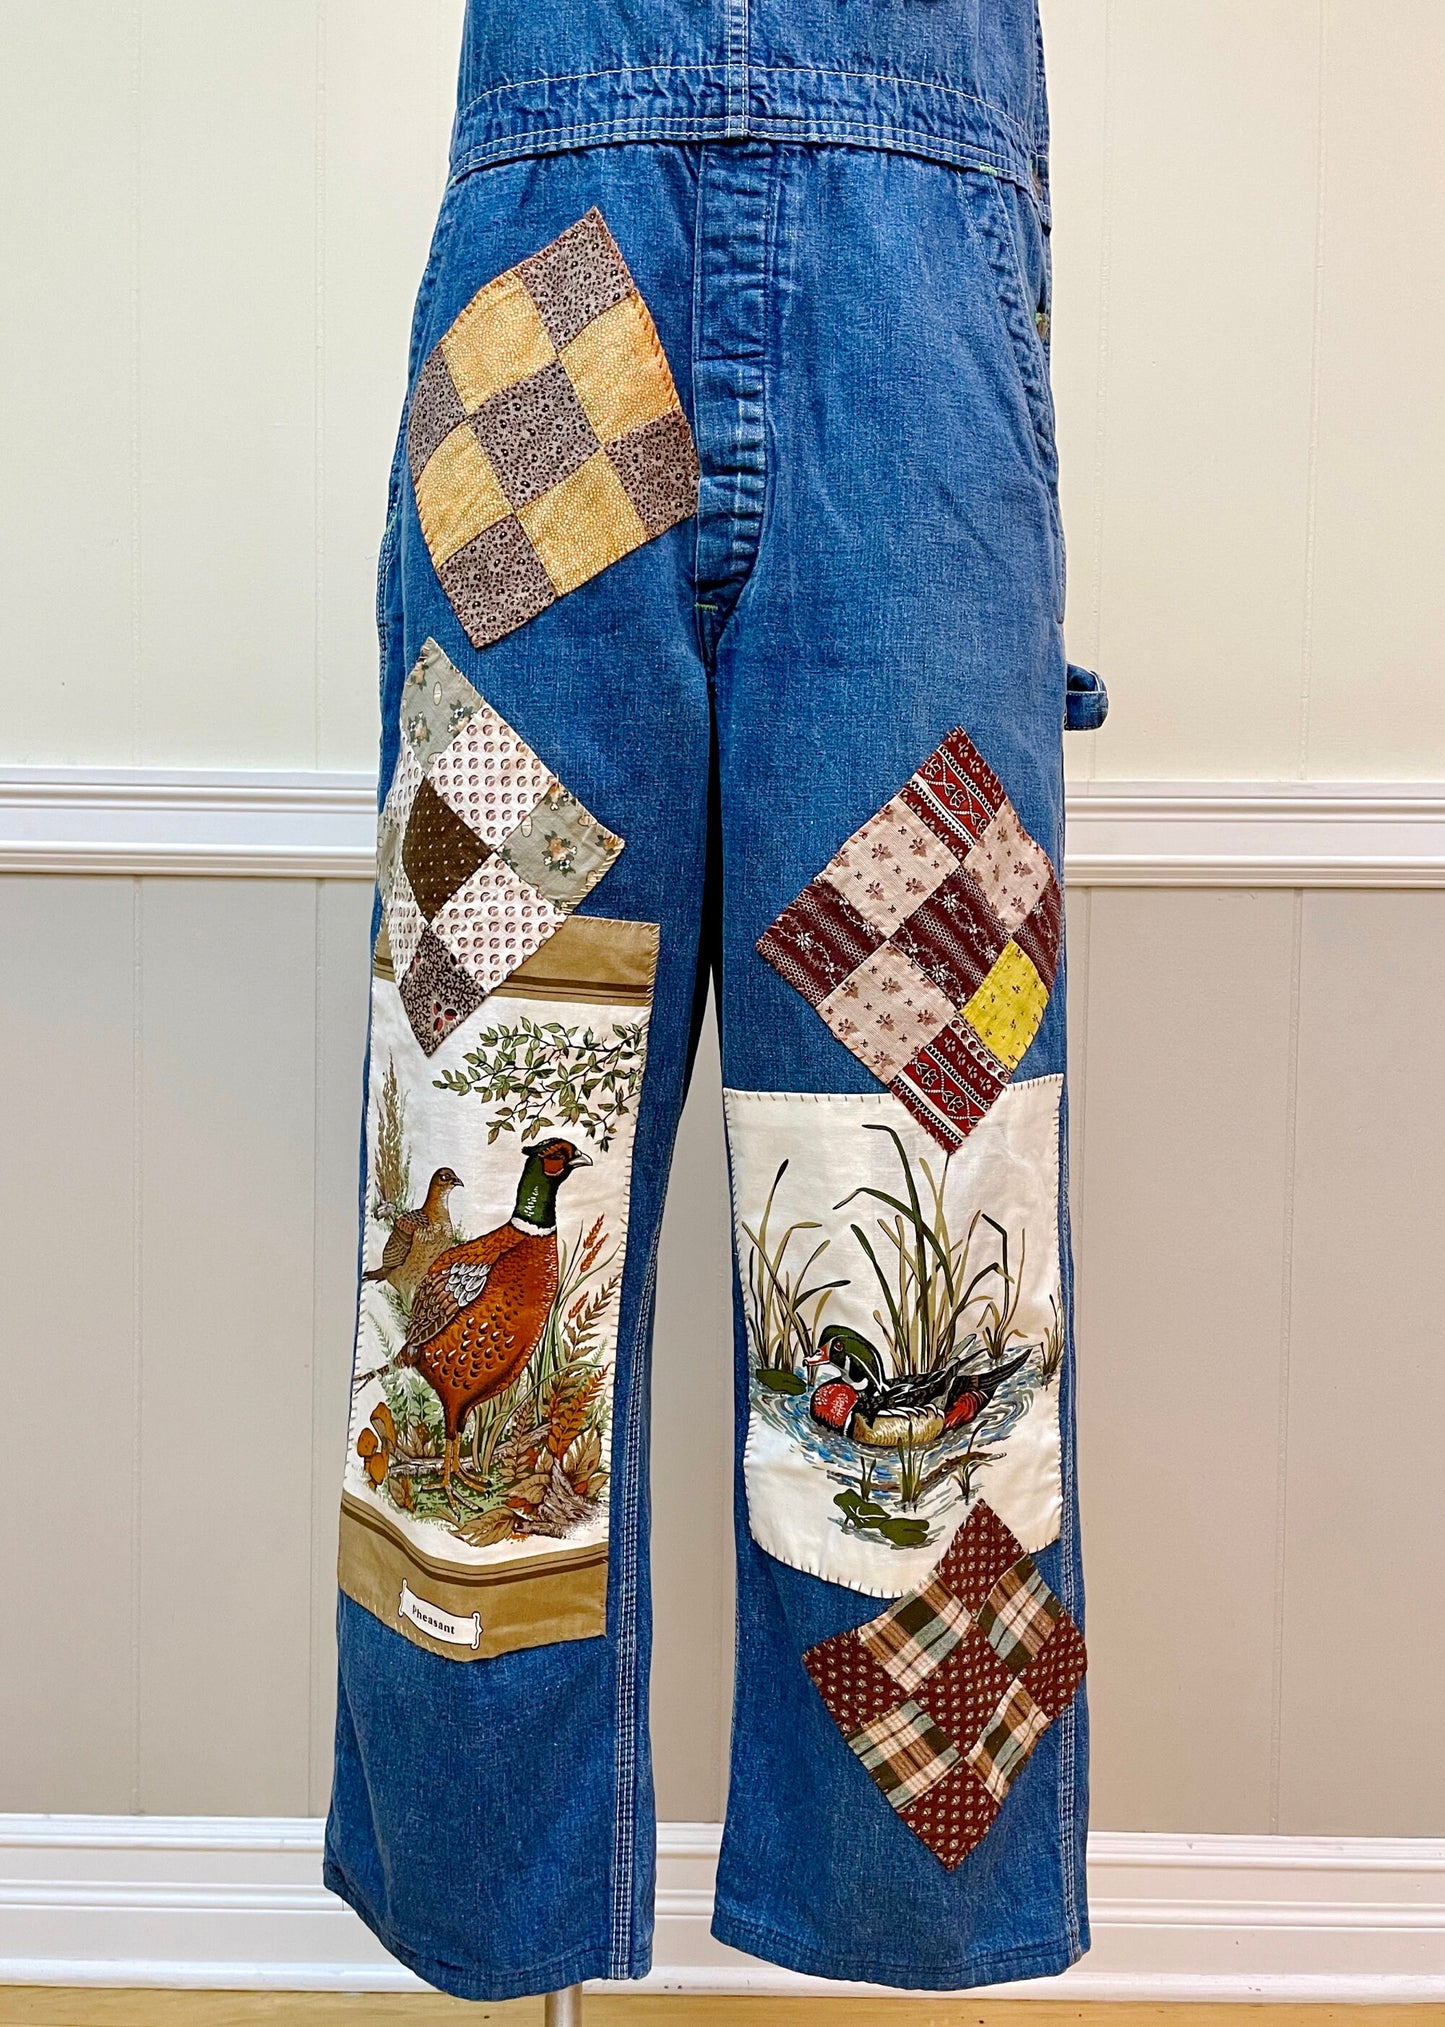 a pair of jeans with patchwork and a bird on them